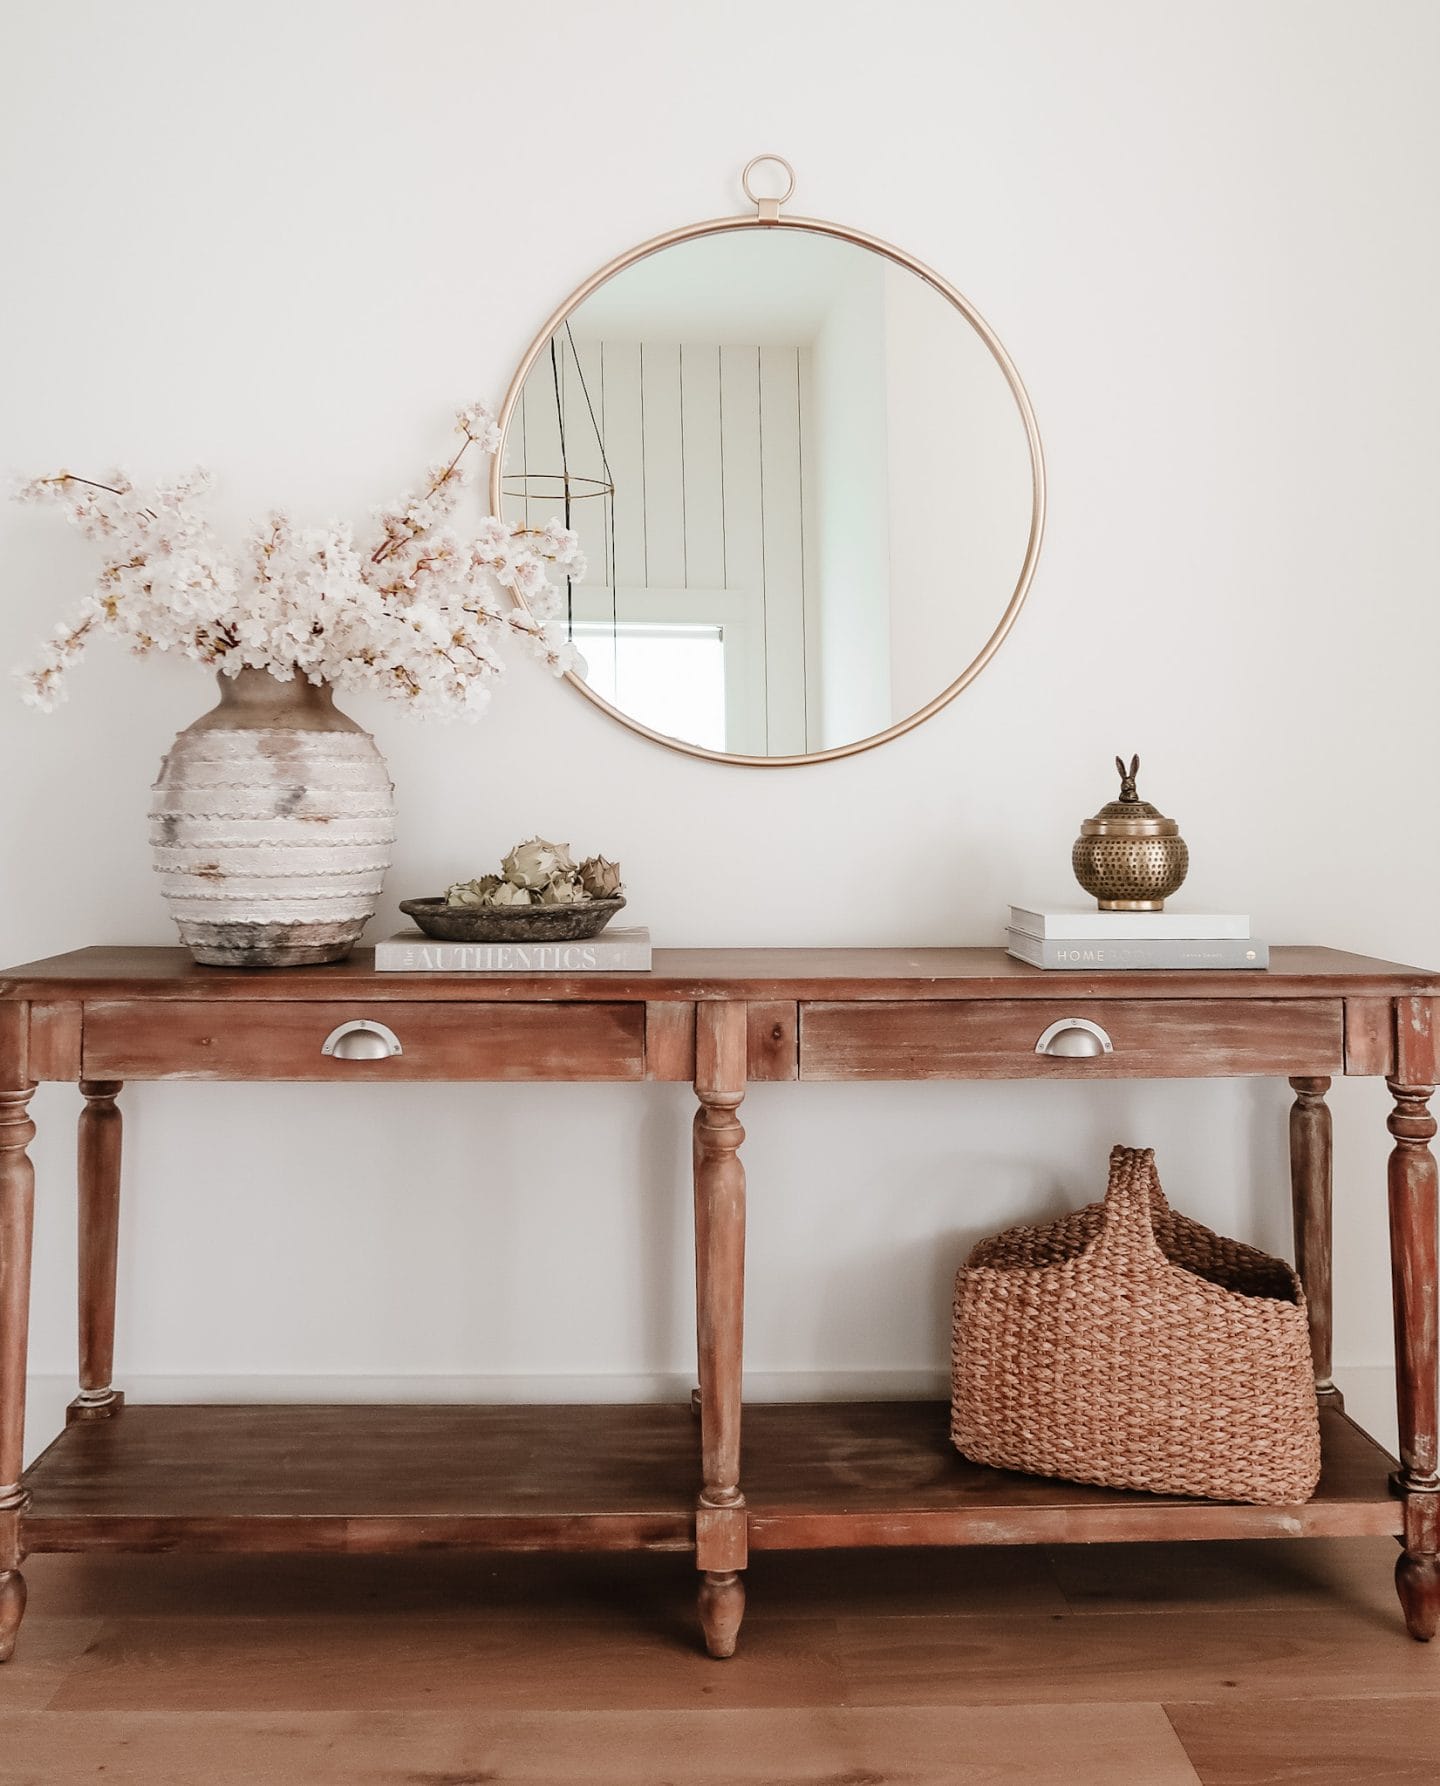 Console Table, Mirror, Basket